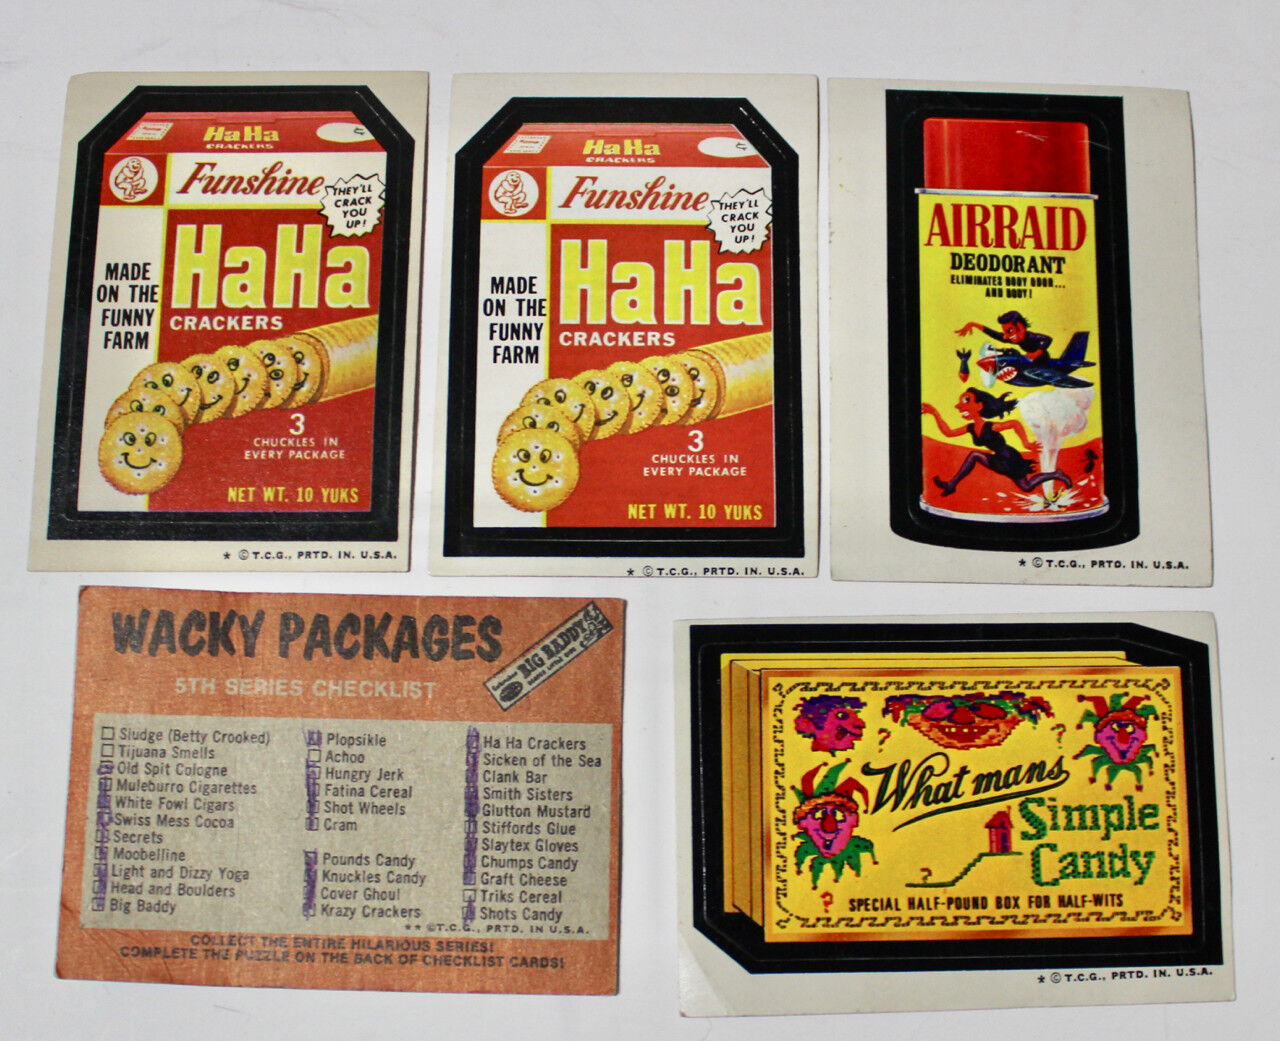 Wacky Packages 5th series vintage lot of 5 1973/4